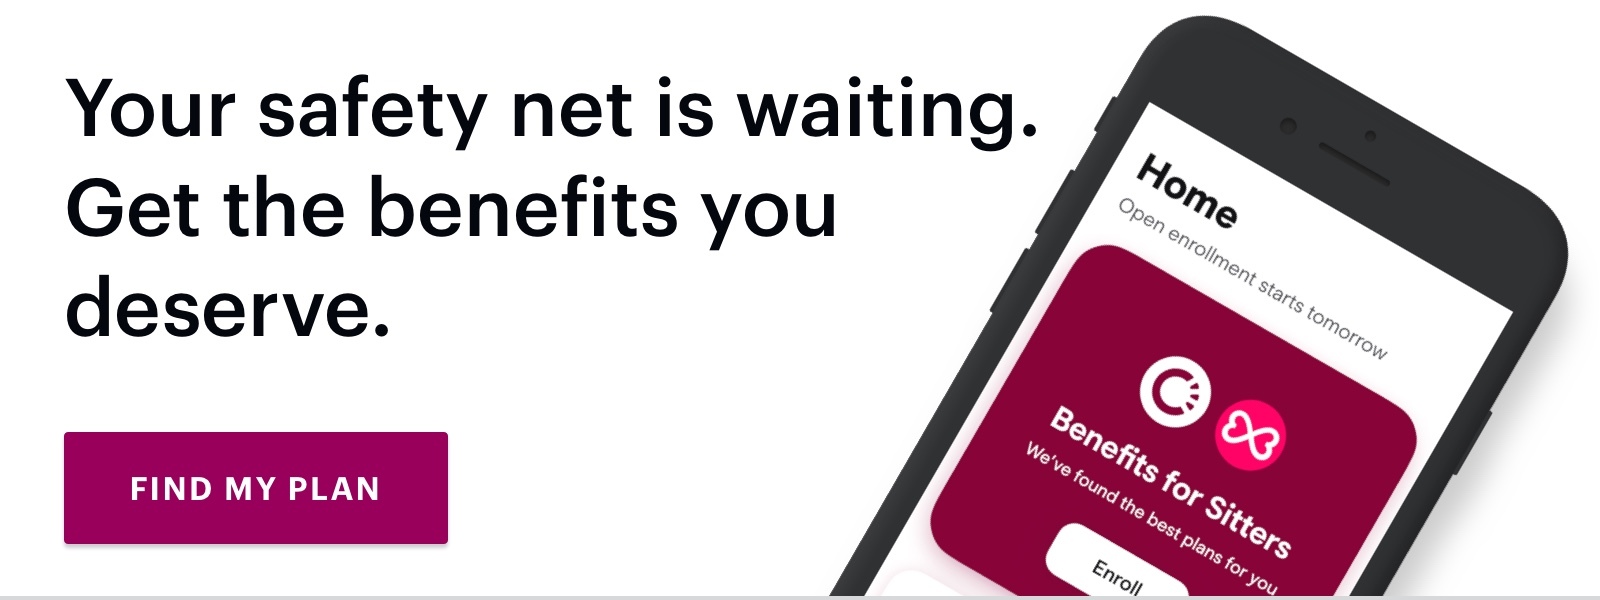 Banner with text saying, "Your safety net is waiting. Get the benefits you deserve."